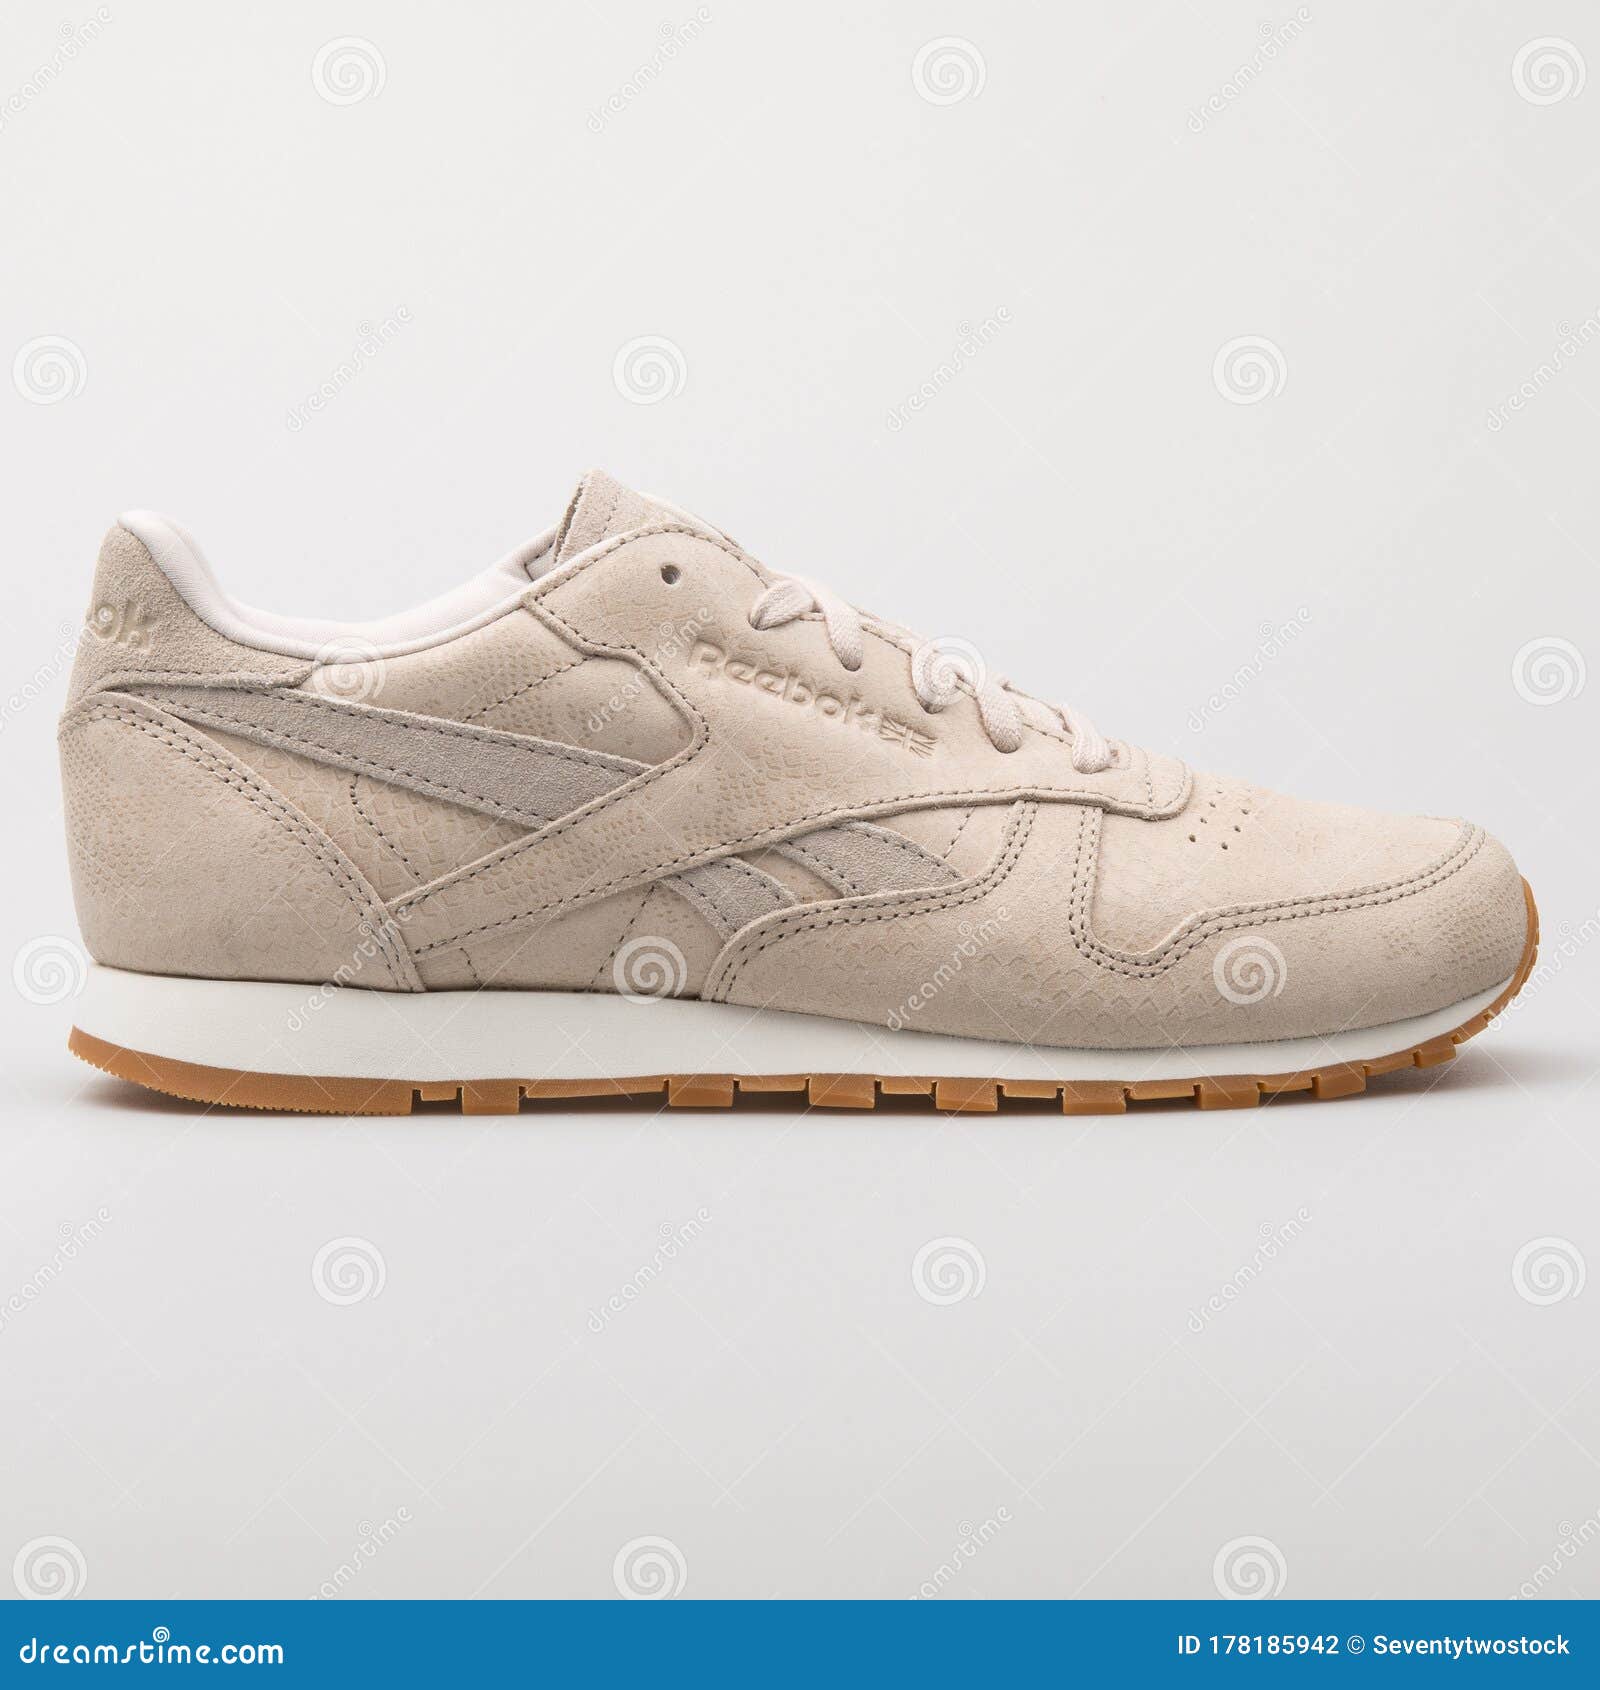 boot cafetaria begaan Reebok Classic Leather Clean Exotics Beige Sneaker Editorial Photography -  Image of shoe, item: 178185942